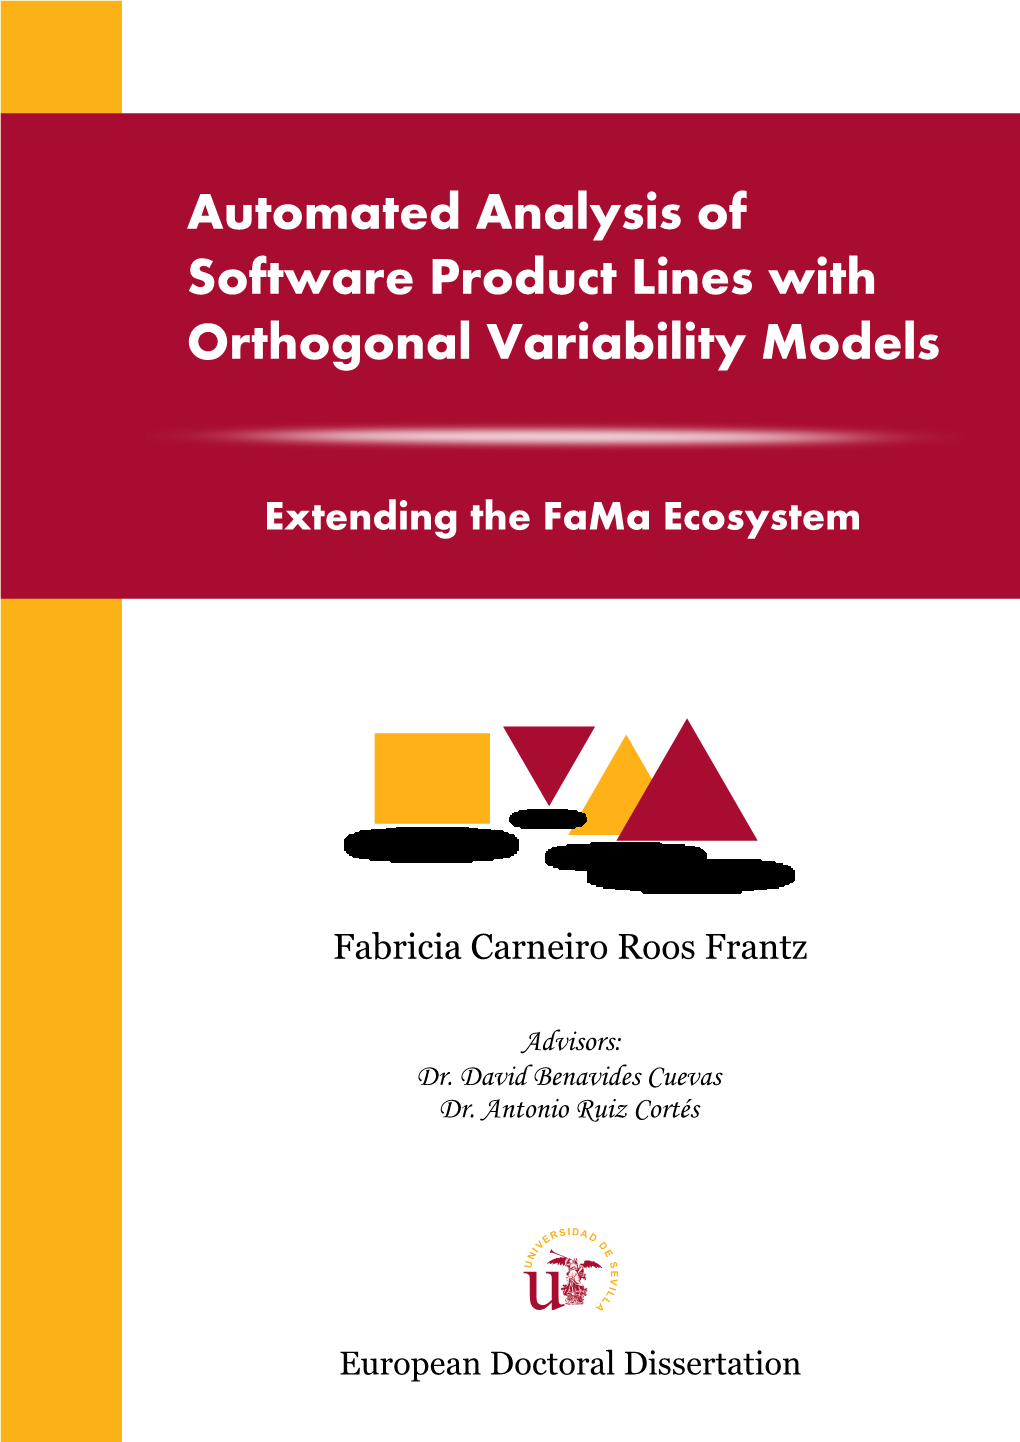 Automated Analysis of Software Product Lines with Orthogonal Variability Models